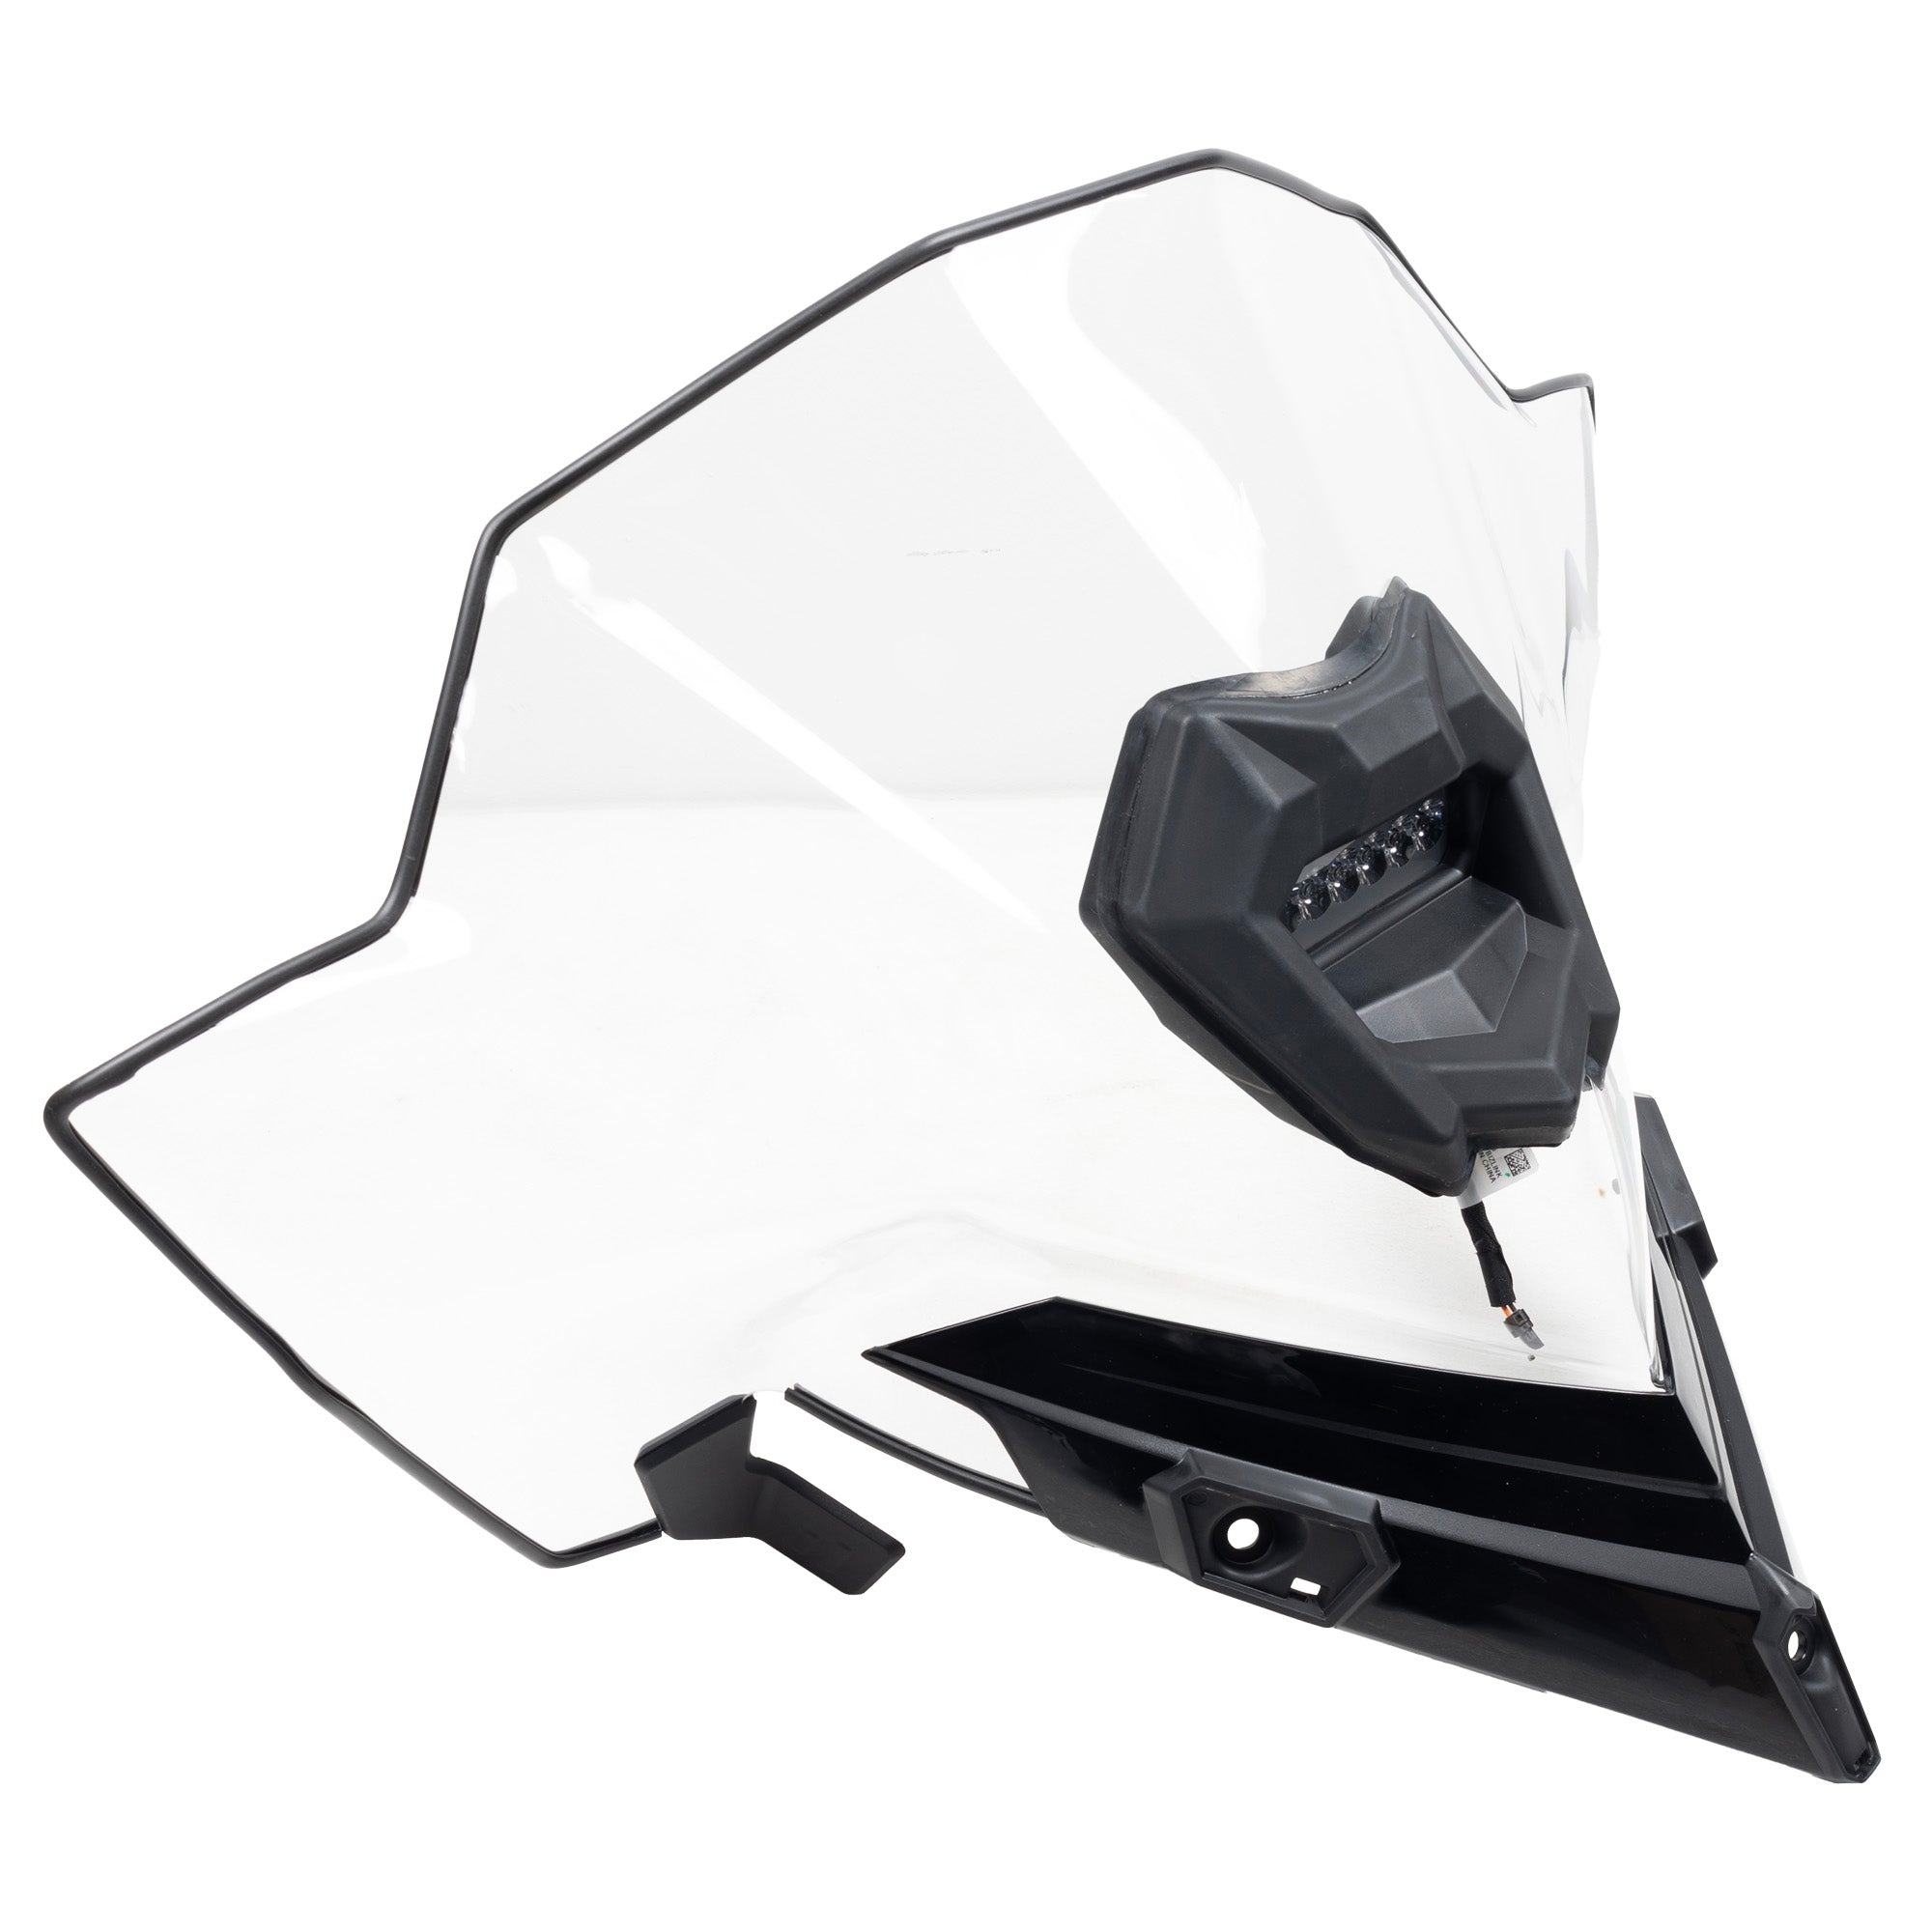 Polaris Tall Windshield with Integrated Auxiliary Light 2890510